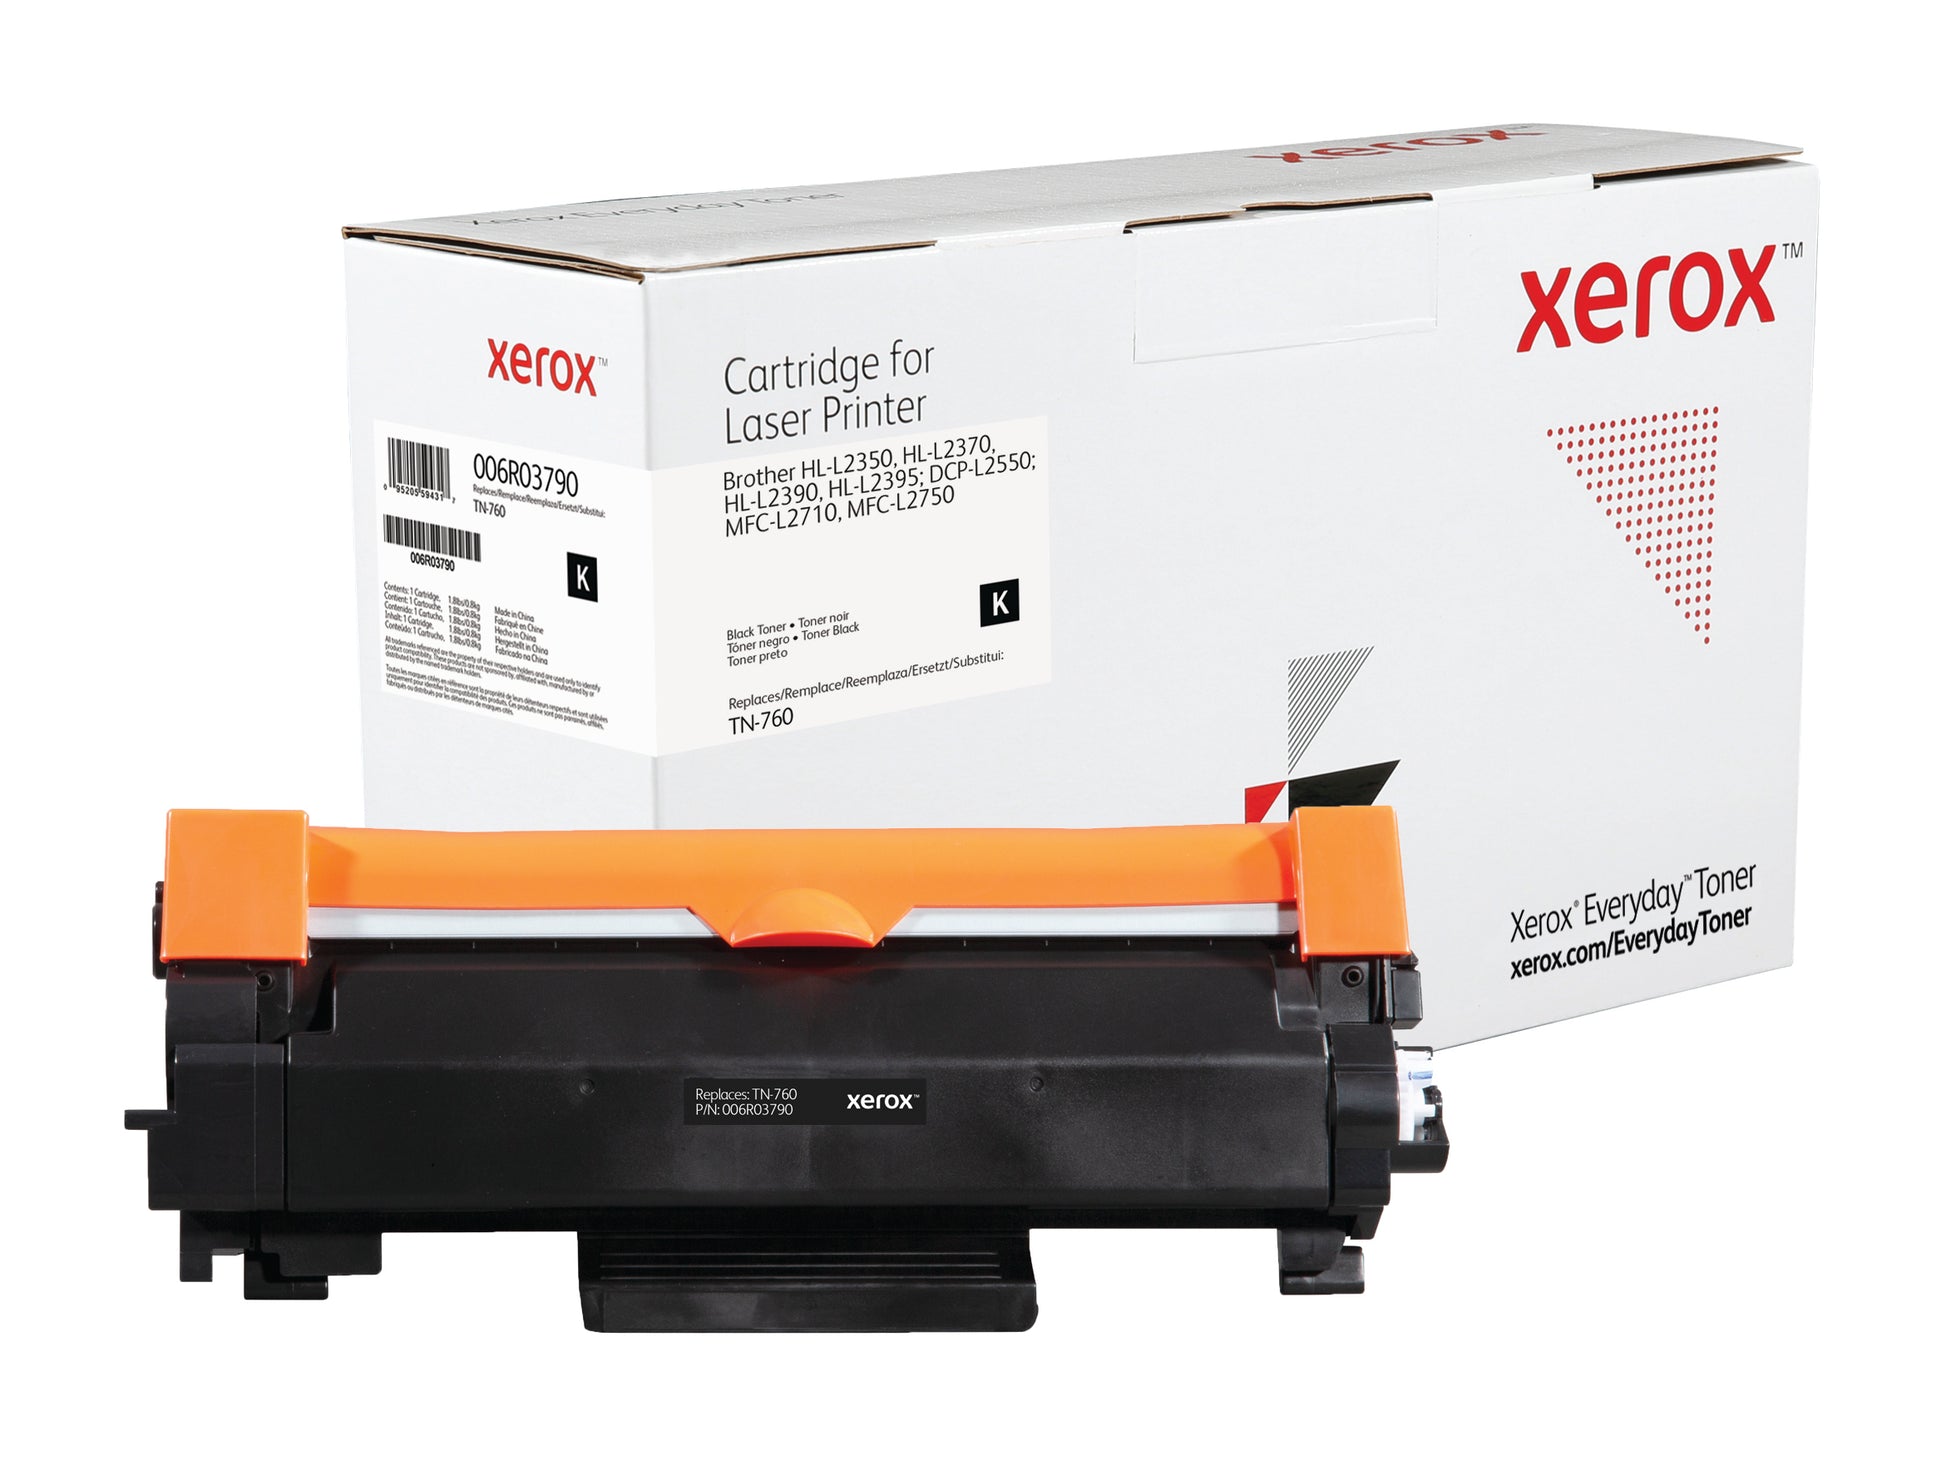 Brother Remanufactured TN760 Black Toner Cartridge - Made by Xerox, Estimated Yield 3,000